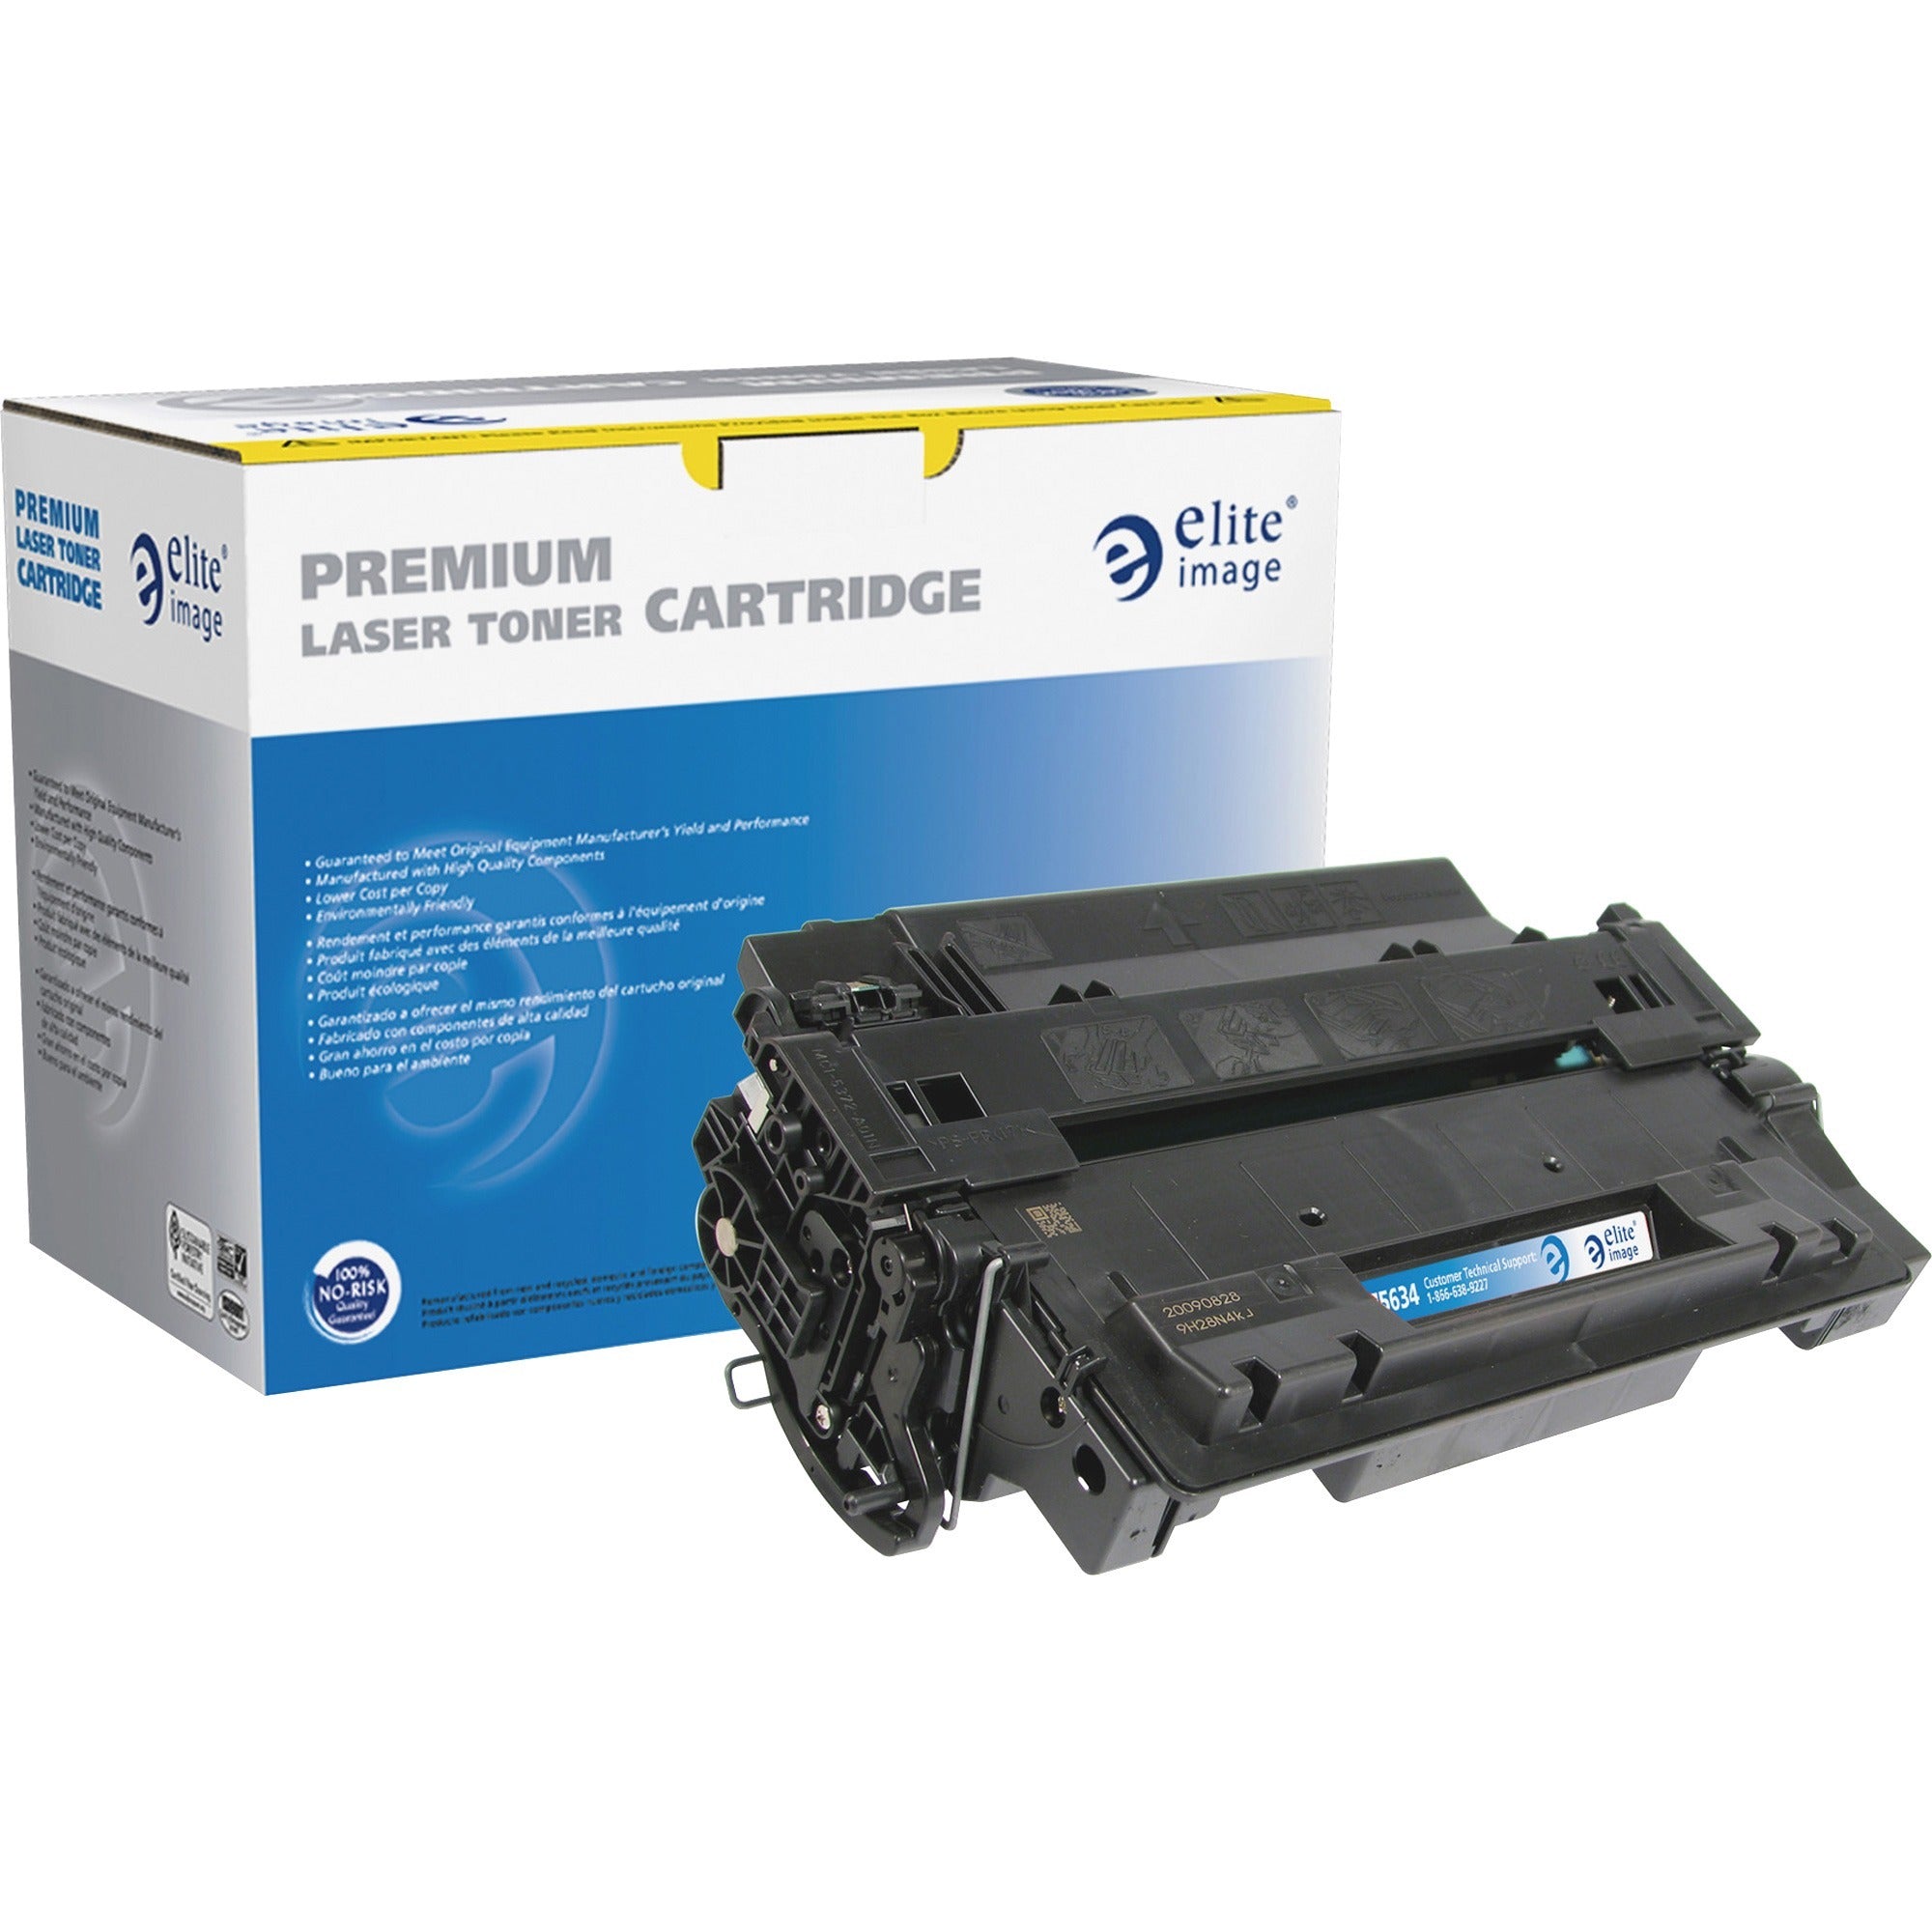 Elite Image Remanufactured MICR Toner Cartridge - Alternative for HP 55X (CE255X) - Laser - High Yield - Black - 12500 Pages - 1 Each - 1